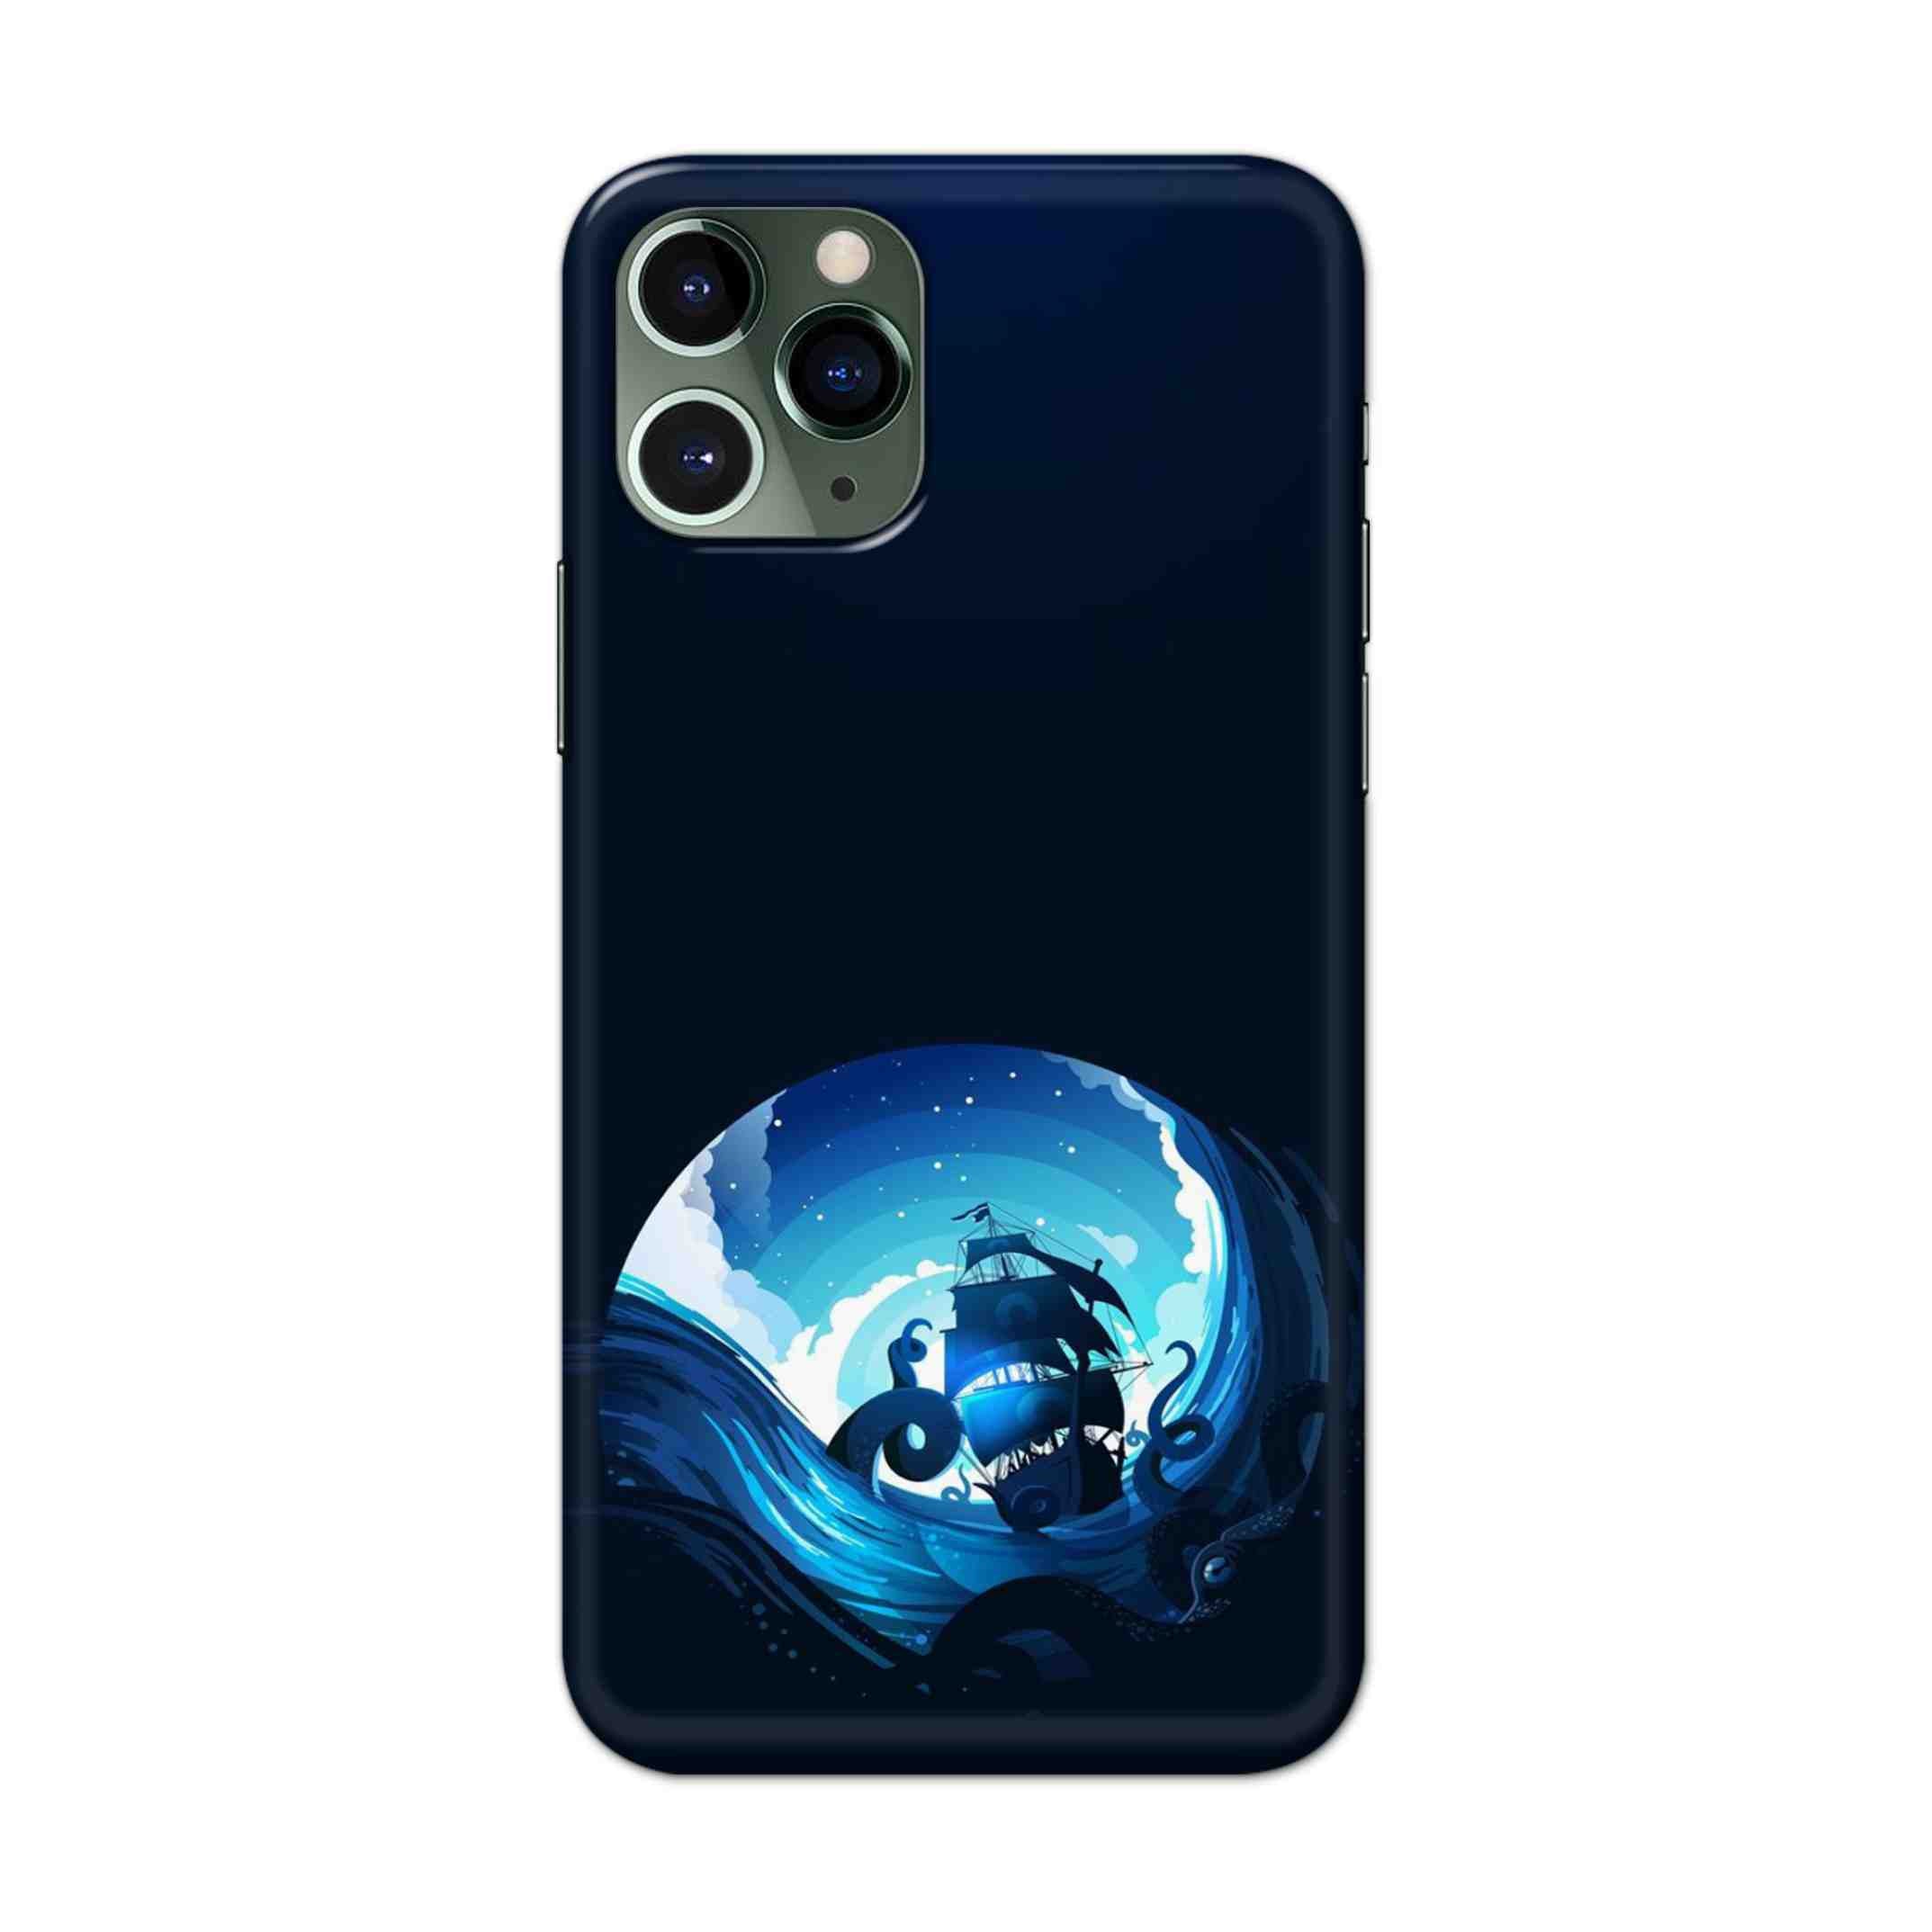 Buy Blue Seaship Hard Back Mobile Phone Case/Cover For iPhone 11 Pro Online